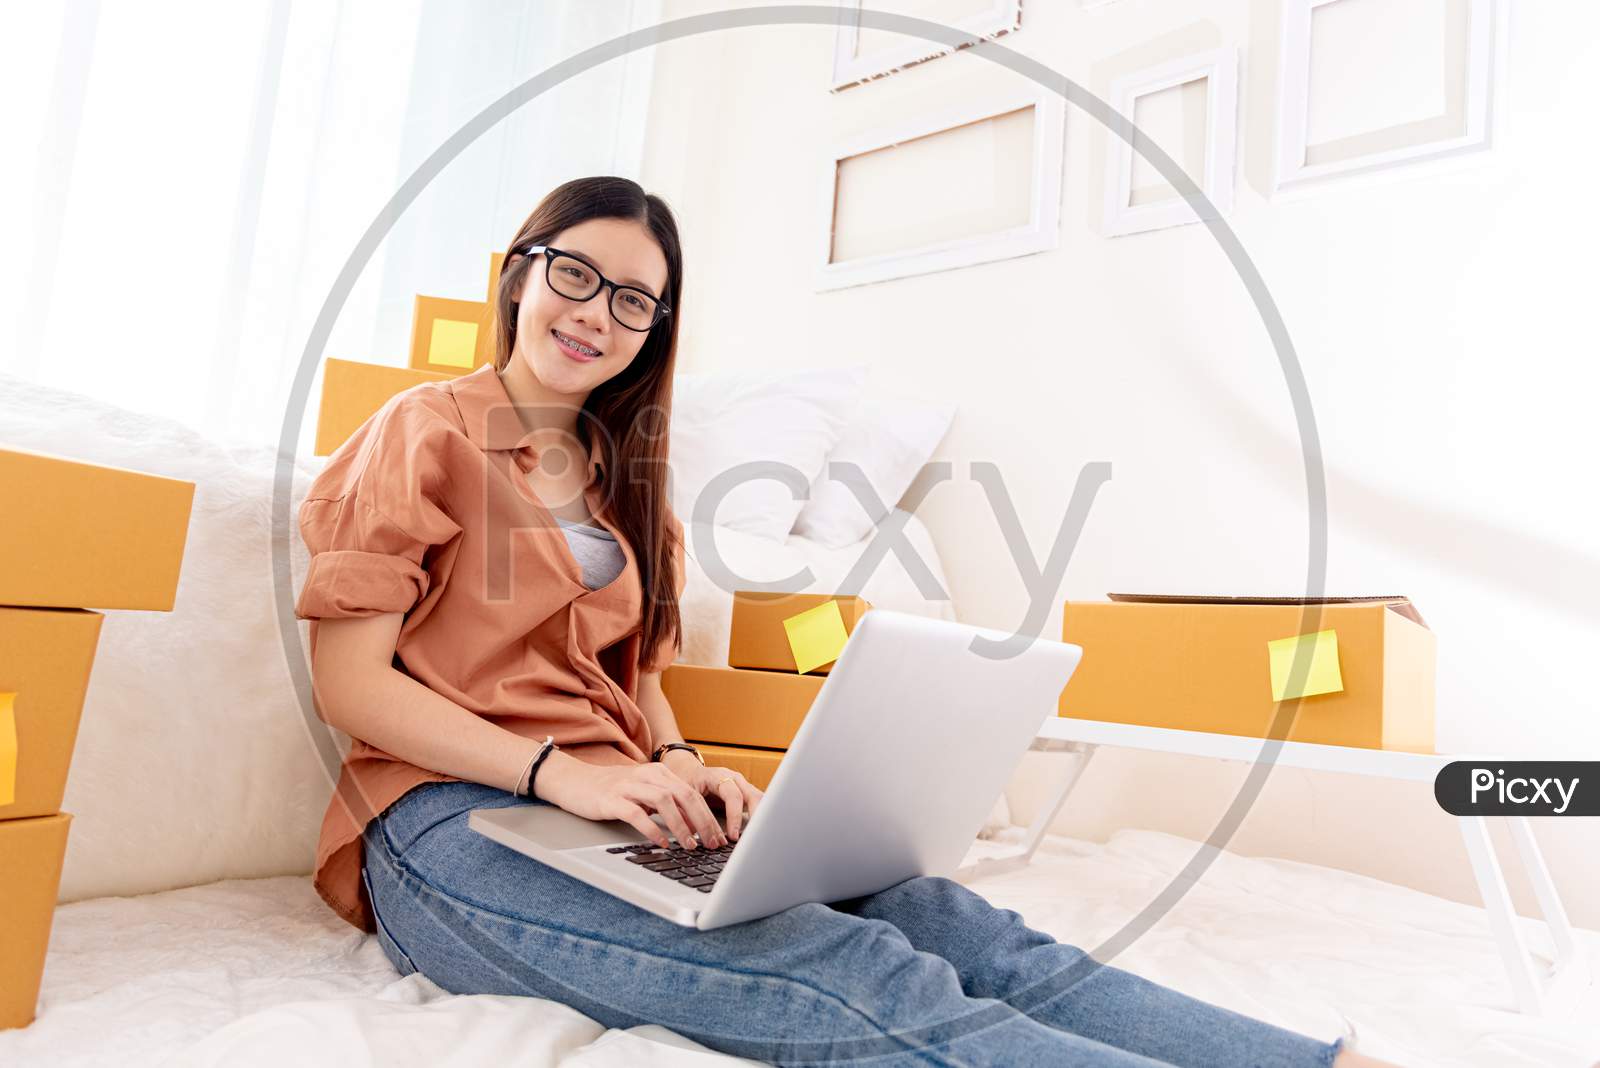 Beauty Asian Woman Using Laptop For Customer Support In Bedroom. Business Technology Concept. Delivery Online Shopping. Service. People Lifestyle Remote Work In Domestic House. Looking At Camera